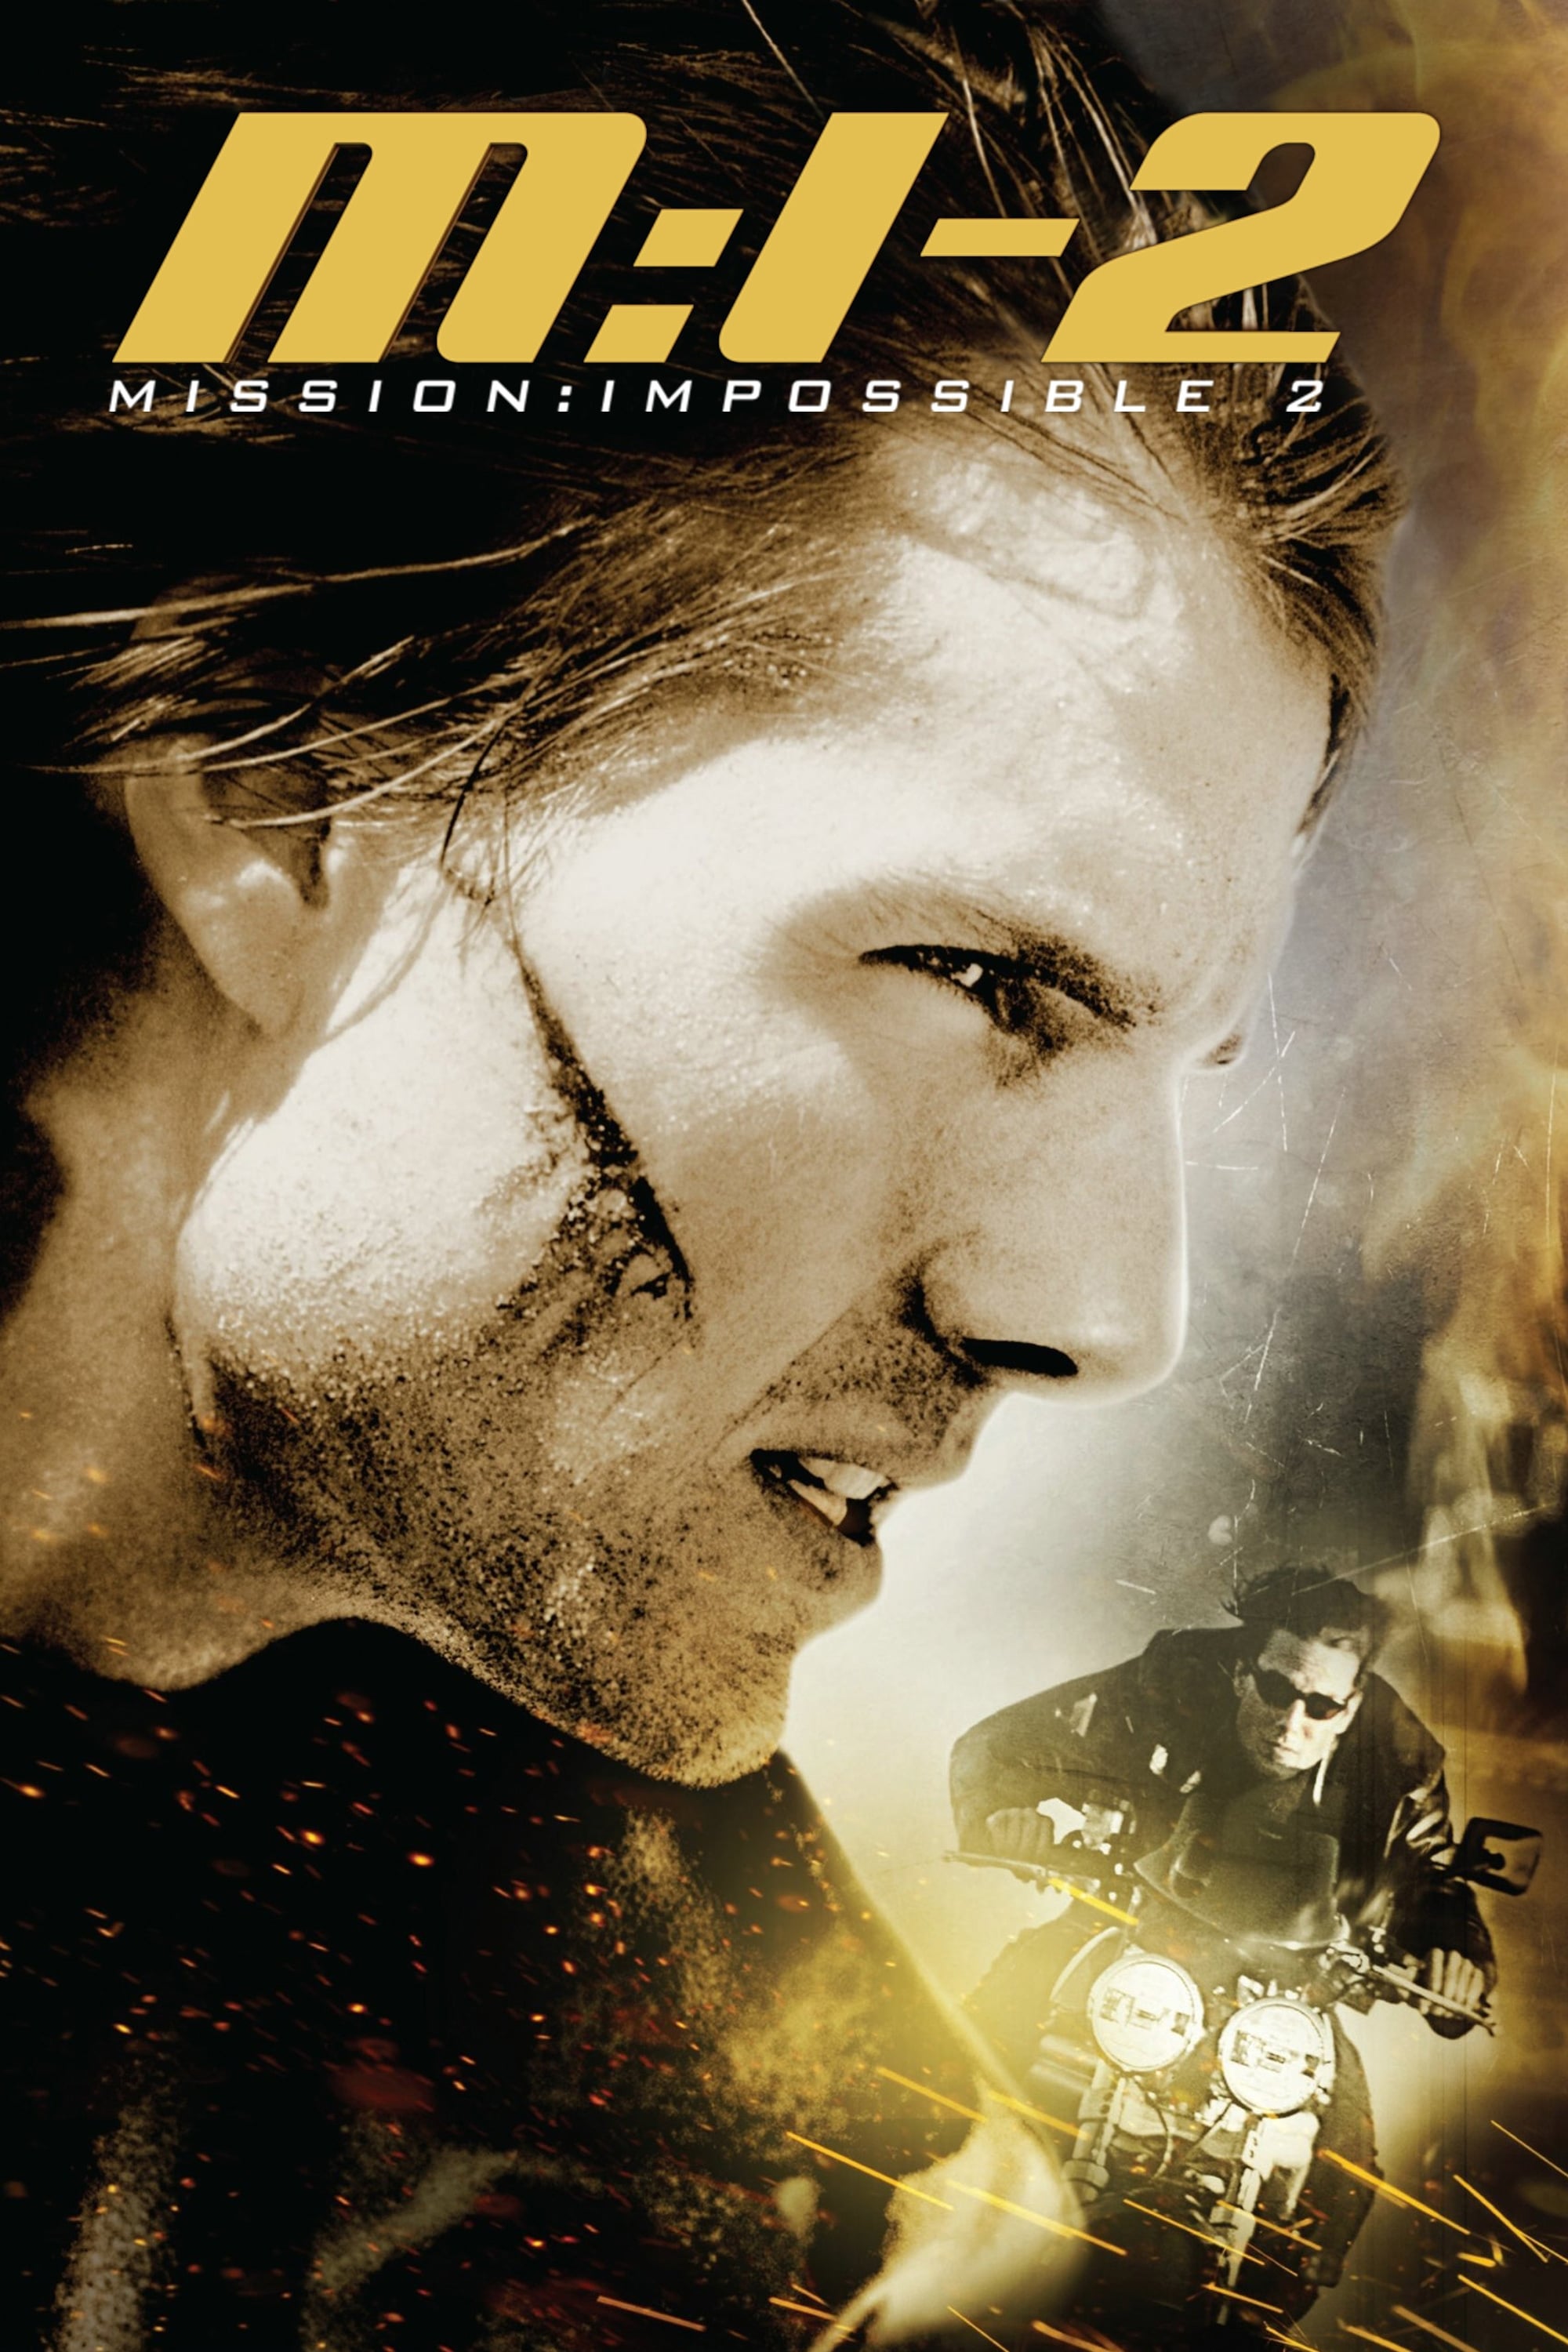 232476 MISSION IMPOSSIBLE 2 MOVIE 2000 WALL PRINT POSTER FR 